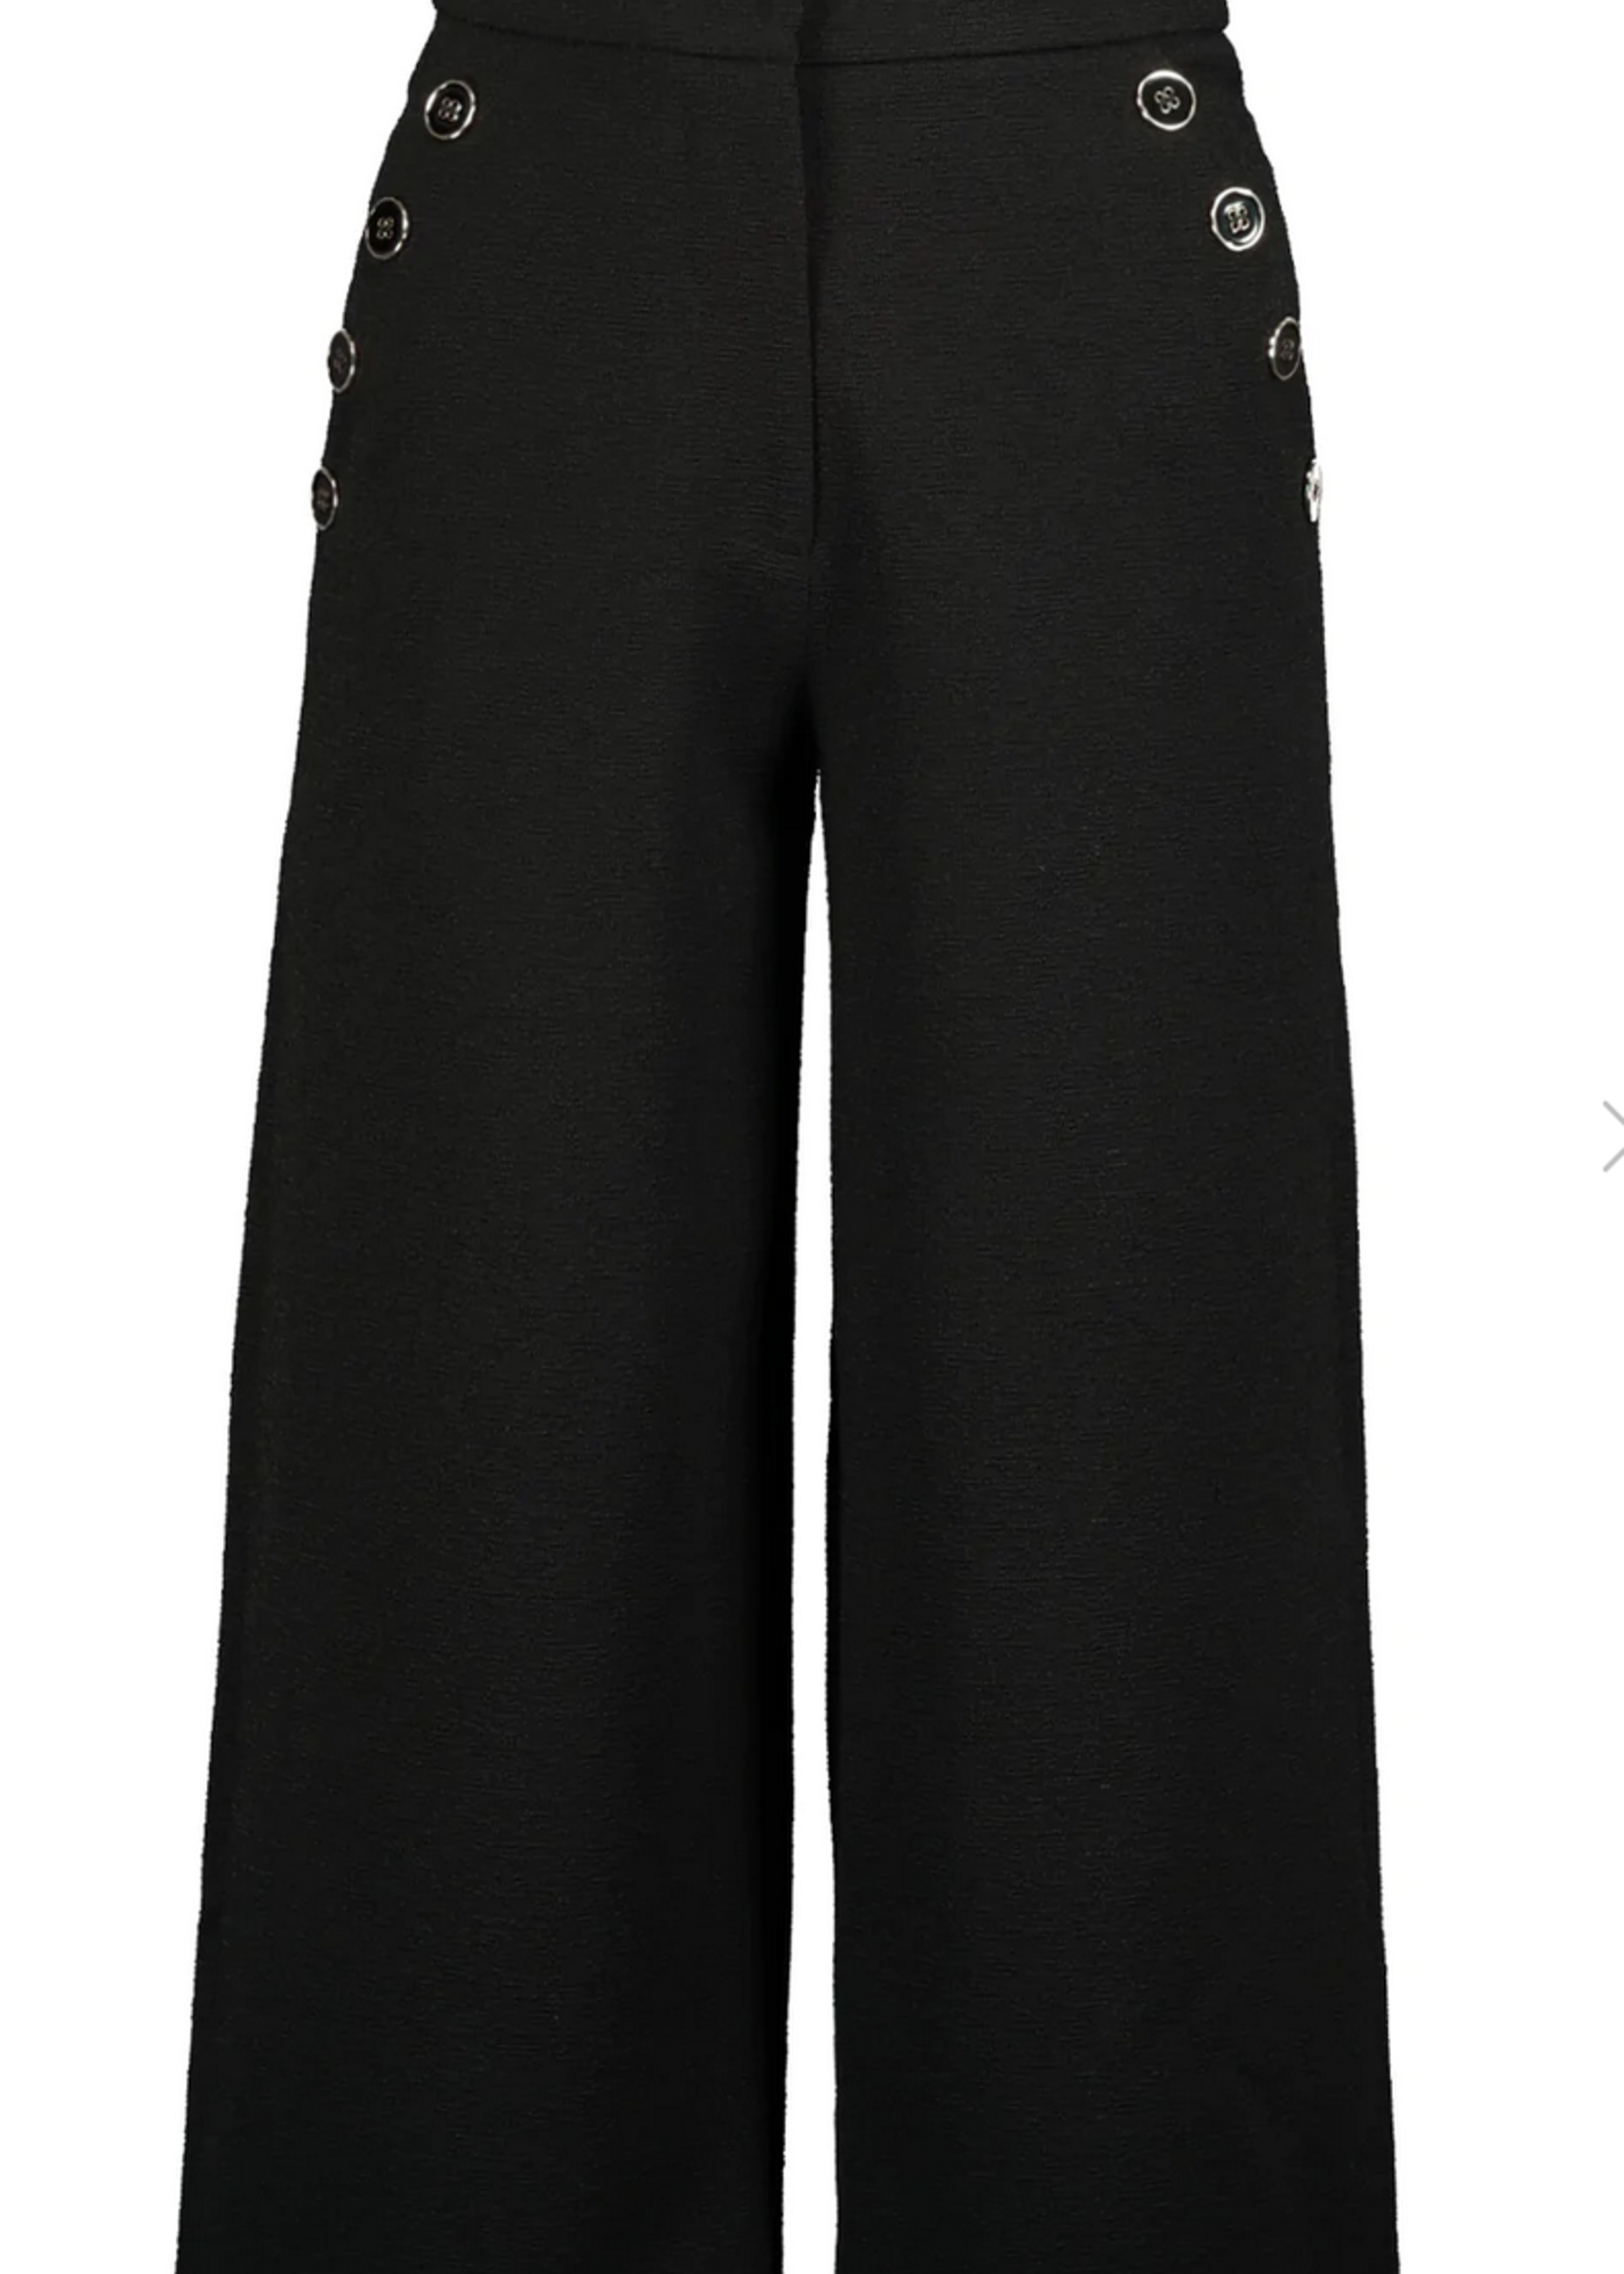 BISHOP+YOUNG FEMME WIDE LEG PANT